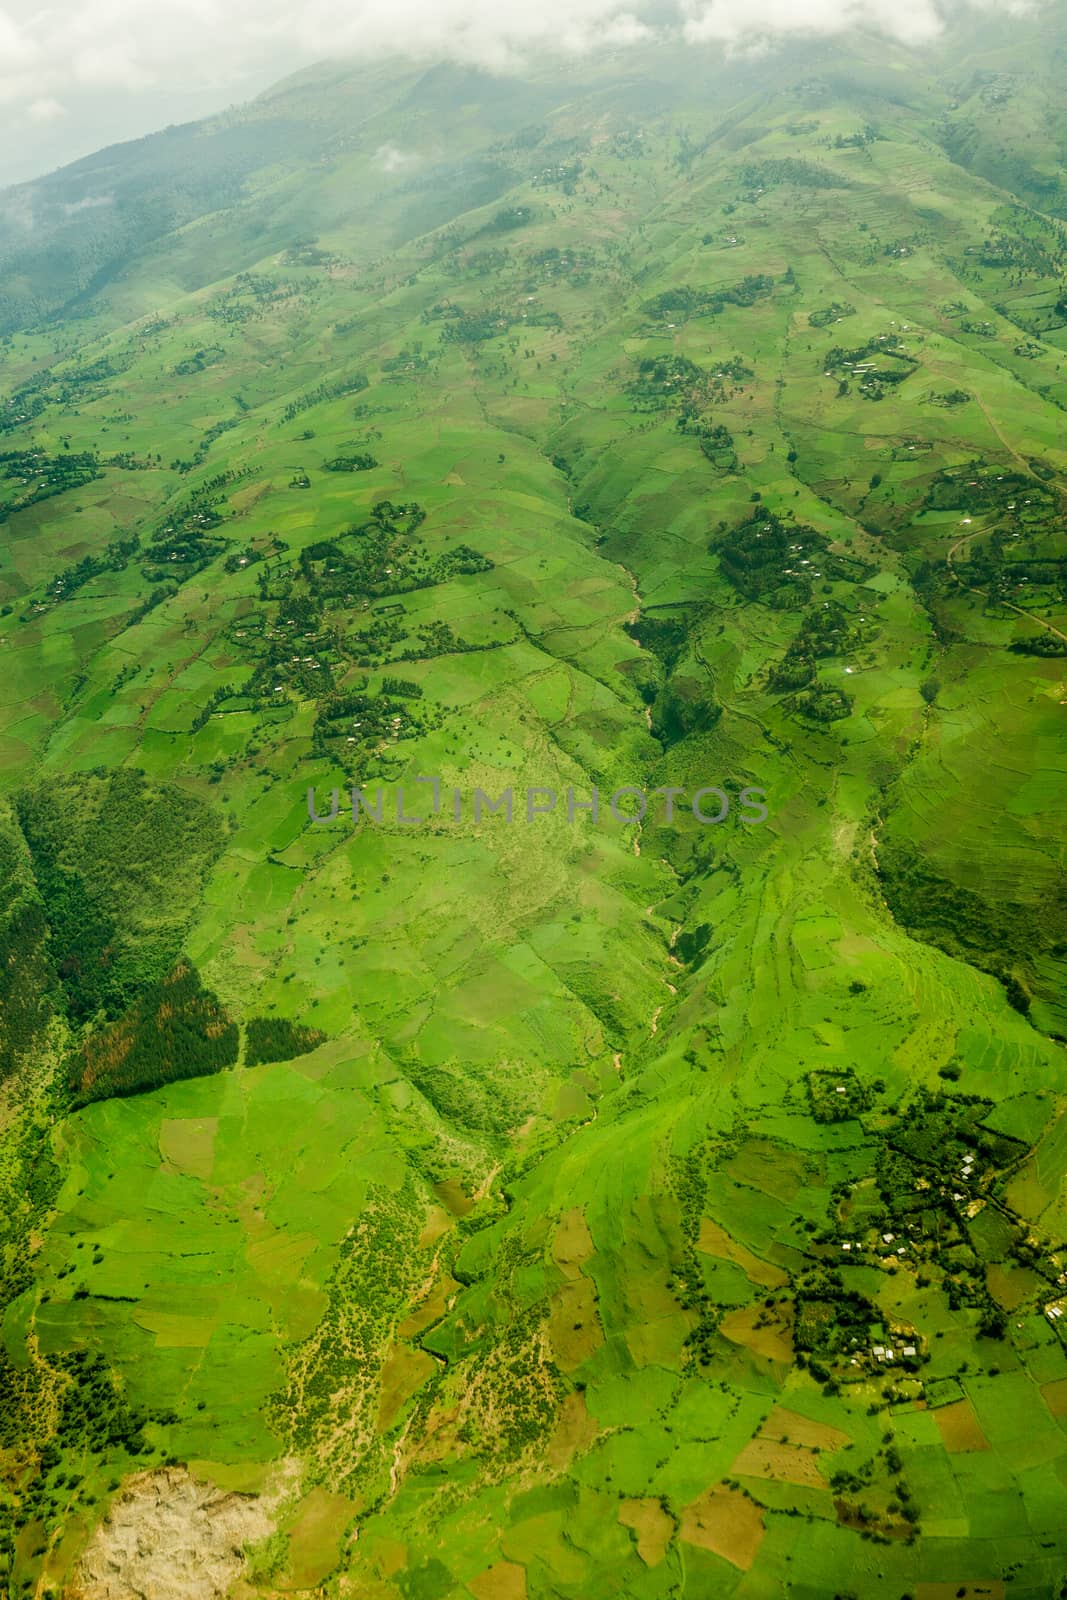 Highlands surrounding Addis Ababa by derejeb